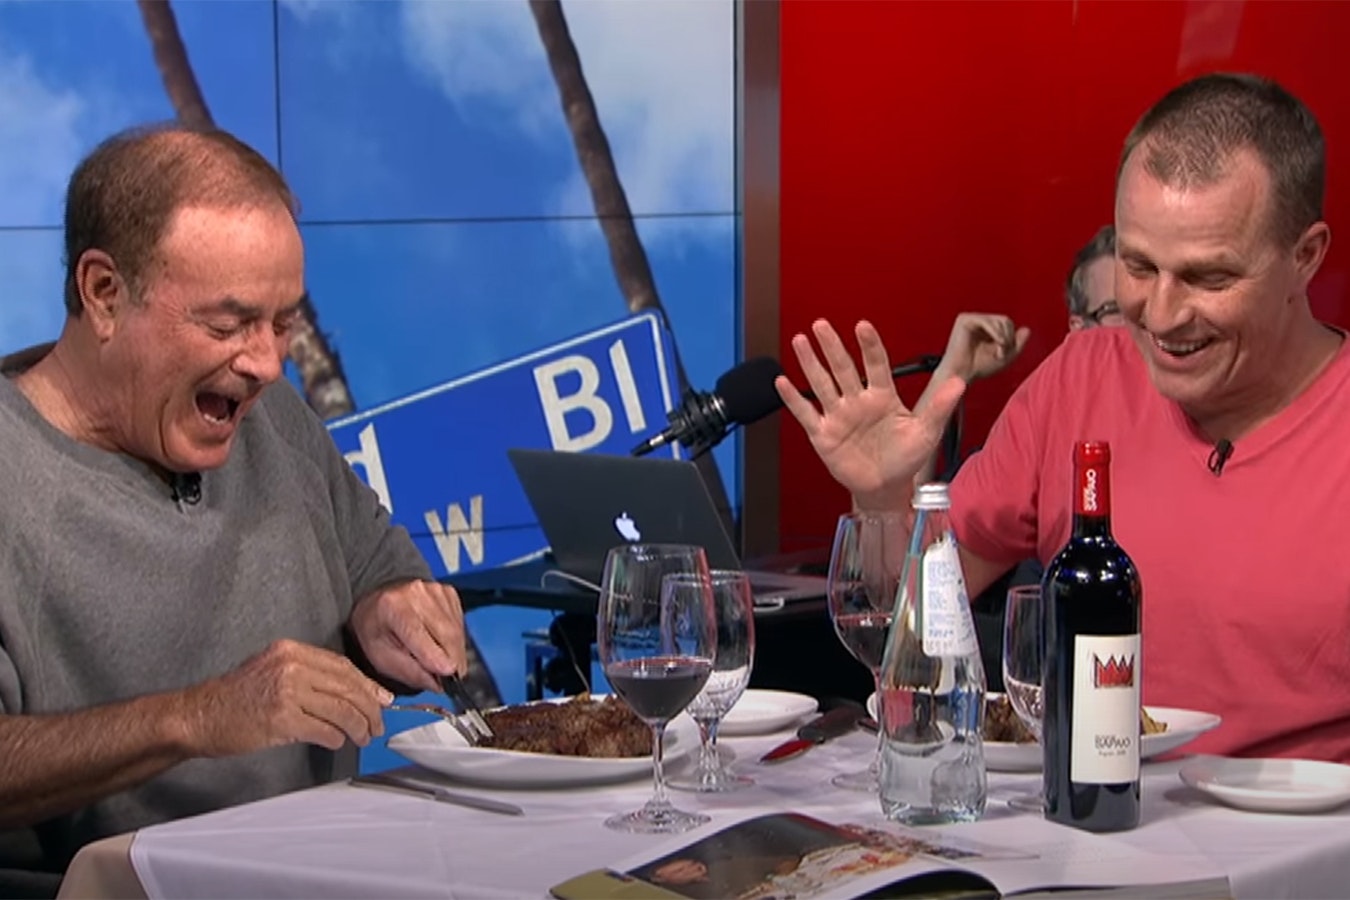 Hall of Fame sportscaster Al Michaels told CNN reporter Chris Wallace last week that he's never knowingly eaten a vegetable in his life. He's seen here eating a steak on the "Dan Patrick Show" in 2016.